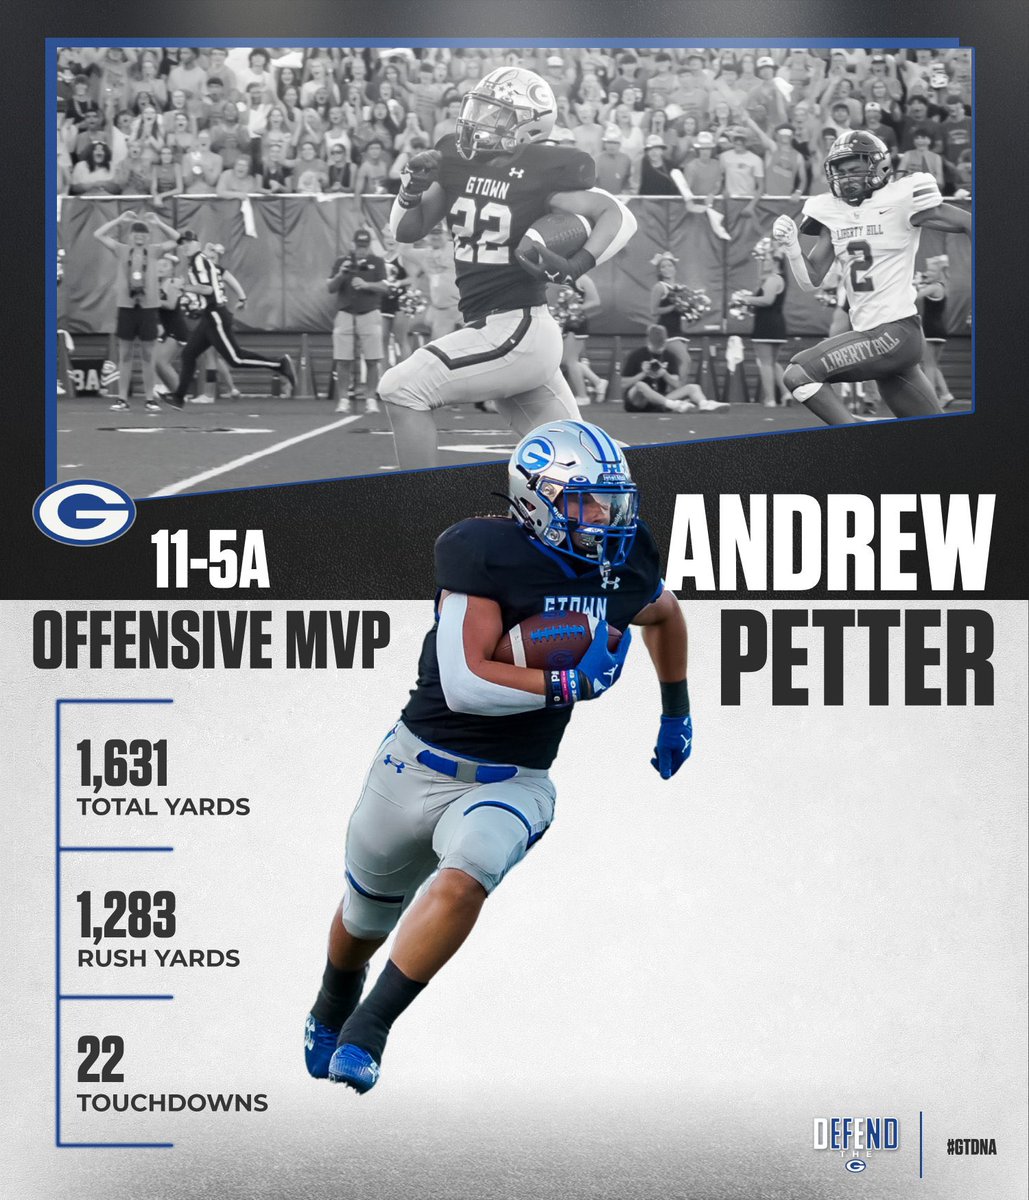 Congratulations SR Andrew Petter on earning the District 11-5A Offensive MVP award #GTDNA